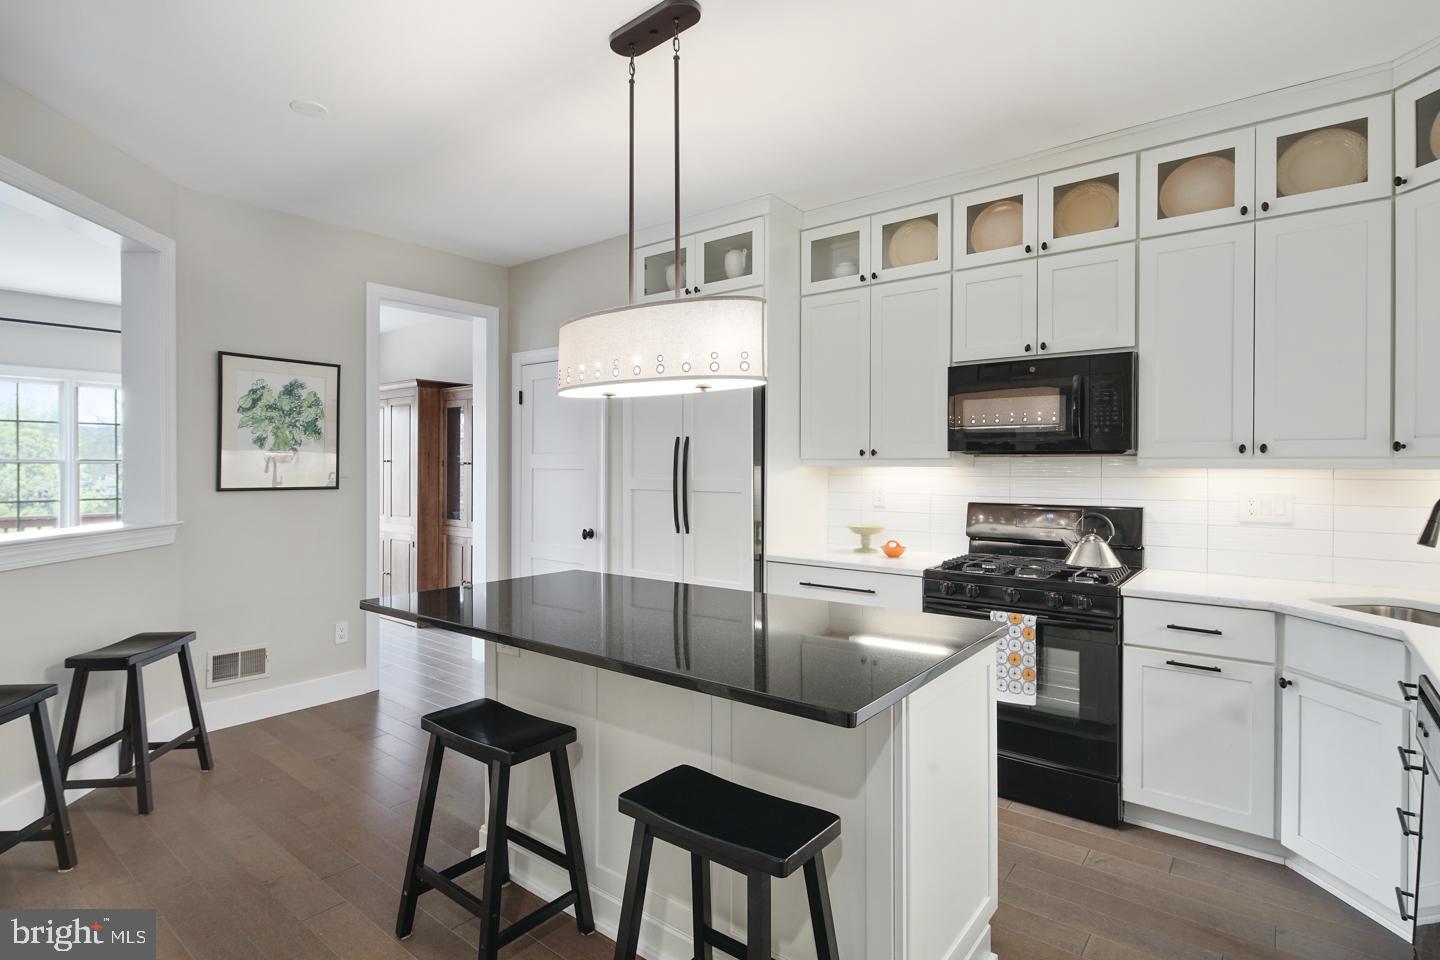 a kitchen with granite countertop a table chairs stove and cabinets